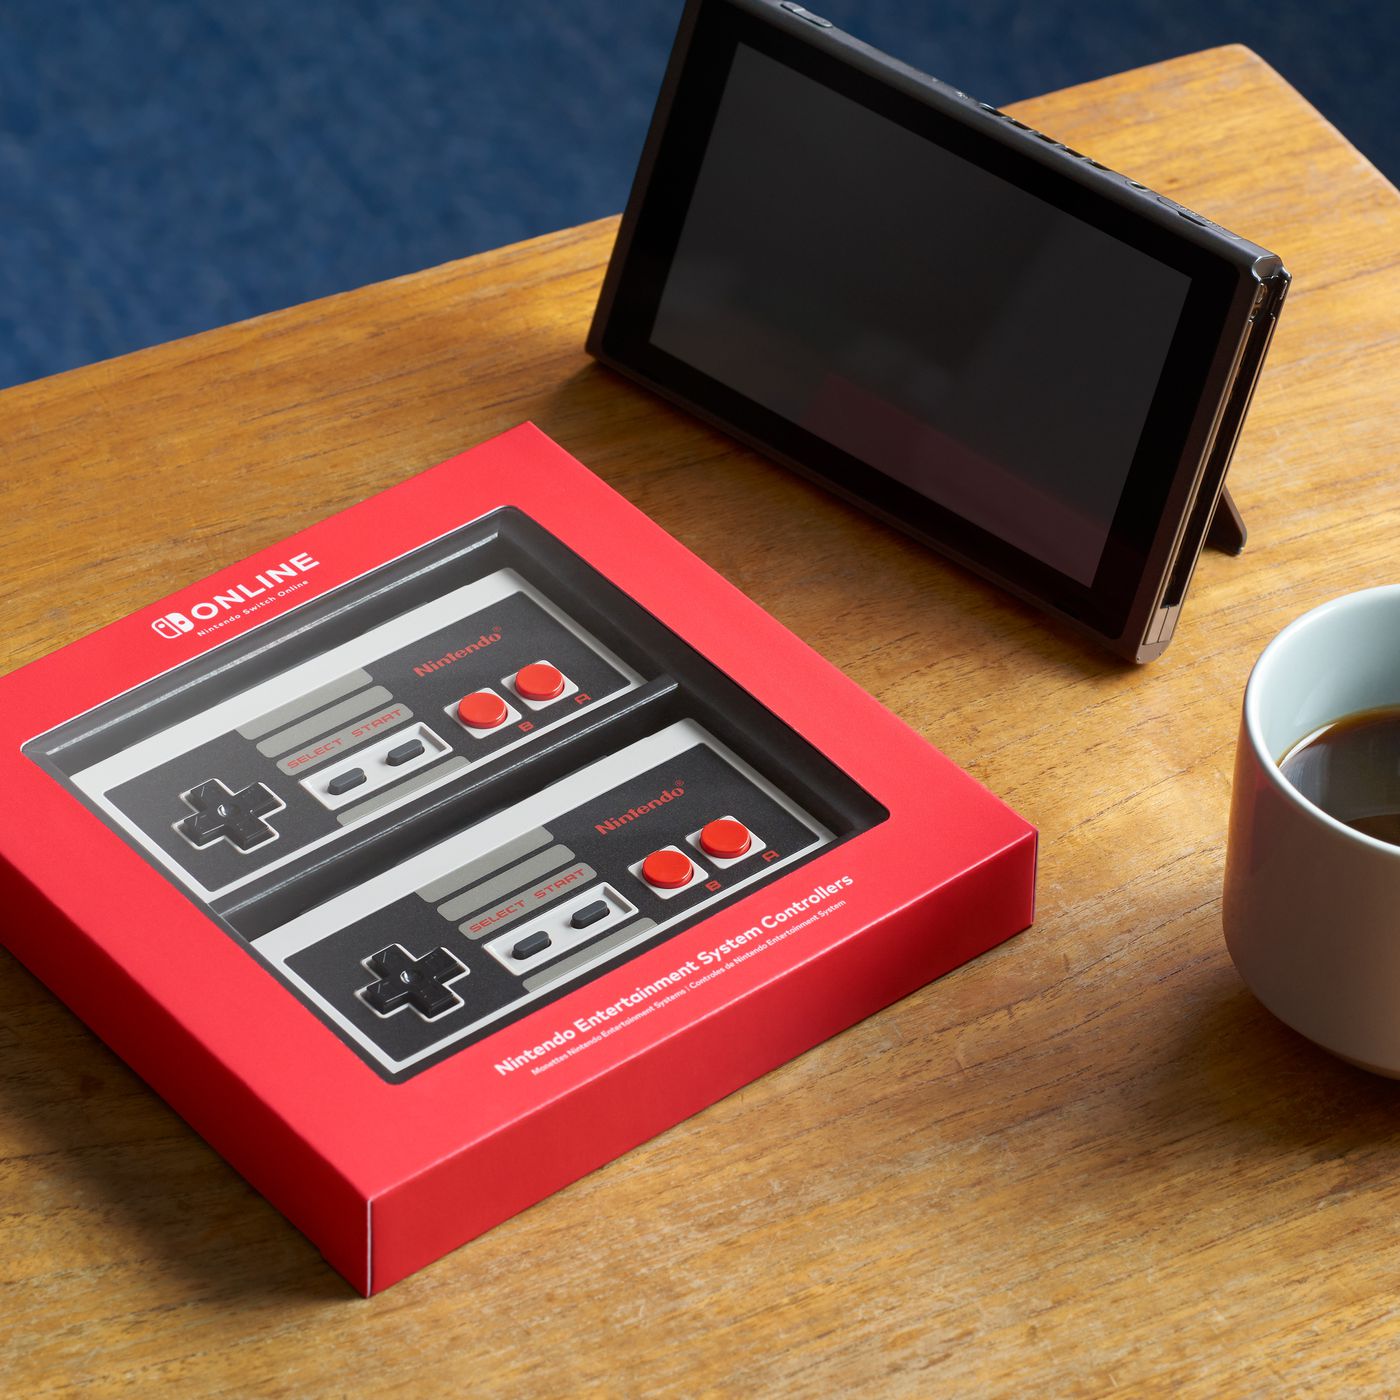 NES controller review - Verge